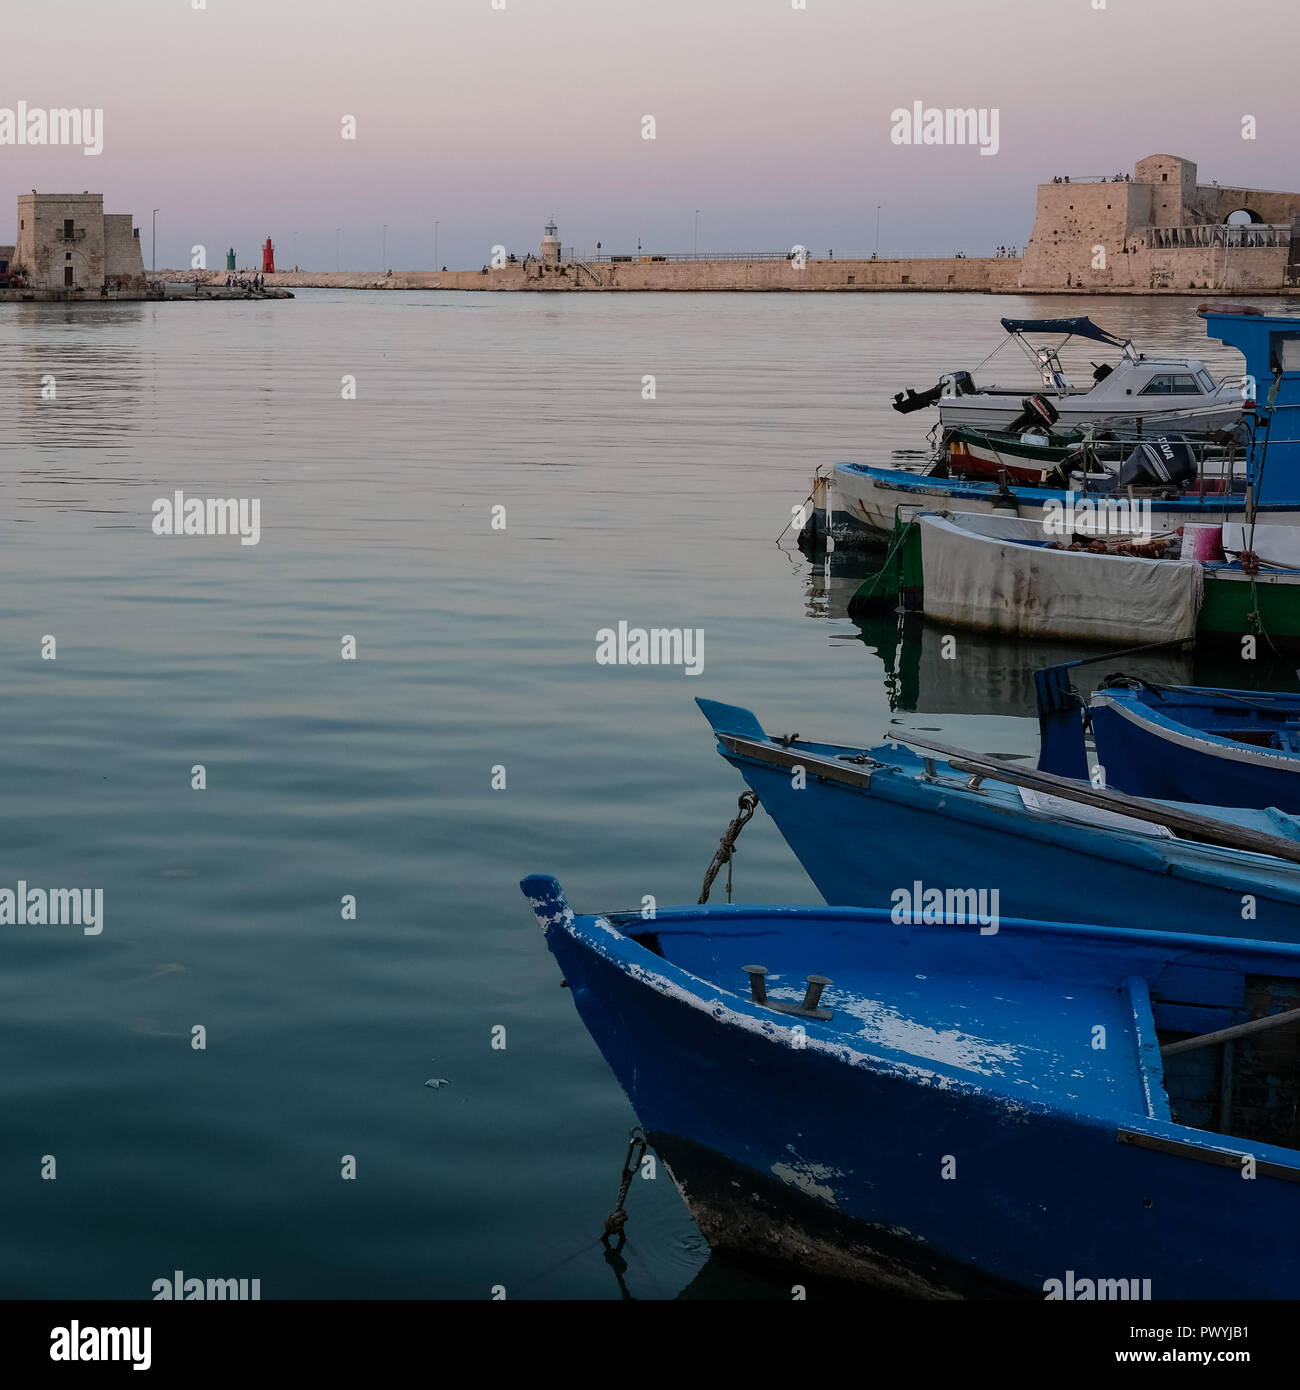 The picturesque fishing port at Trani, historic medieval town in Puglia, southern Italy. Colourful fishing boats in the foreground. Stock Photo